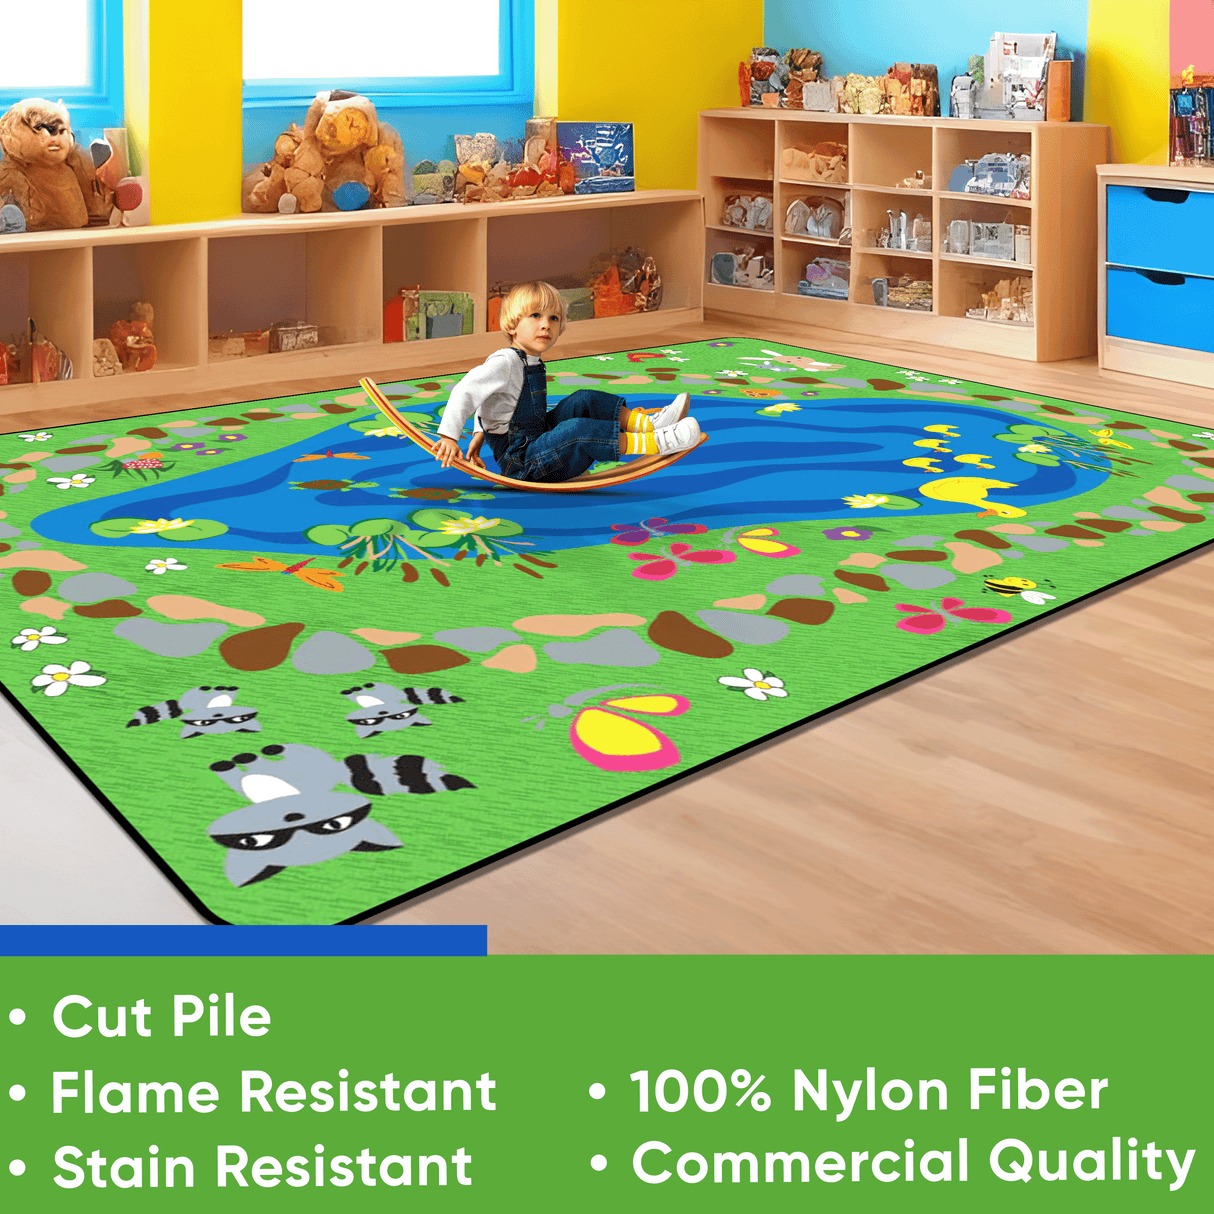 Nature All Around Us Kids Rug (small size)